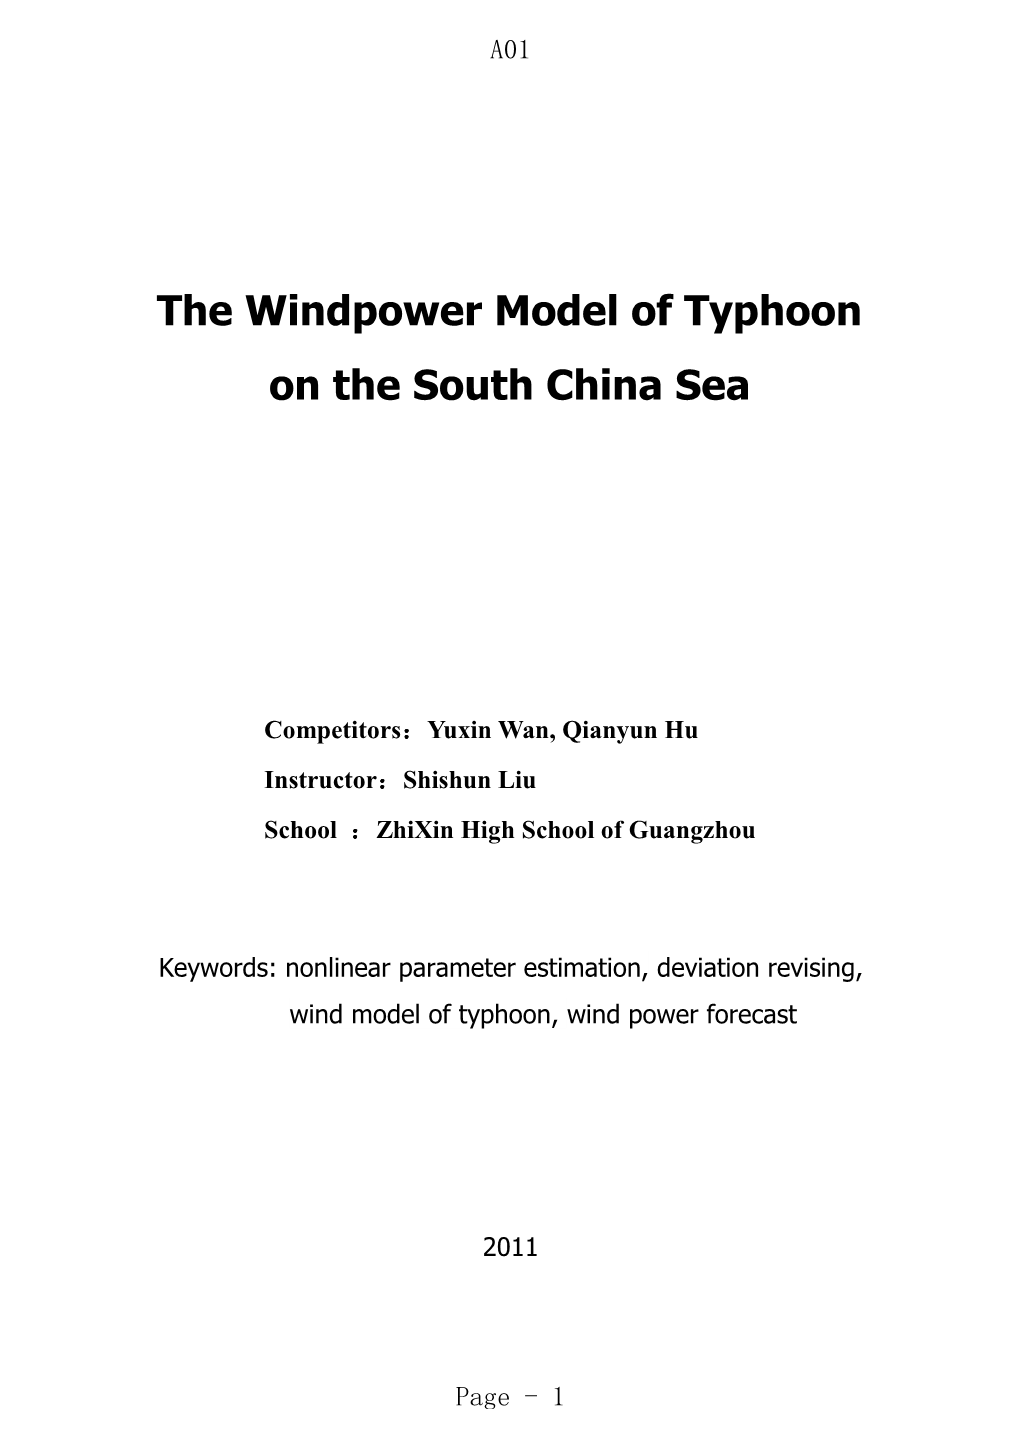 The Windpower Model of Typhoon on the South China Sea